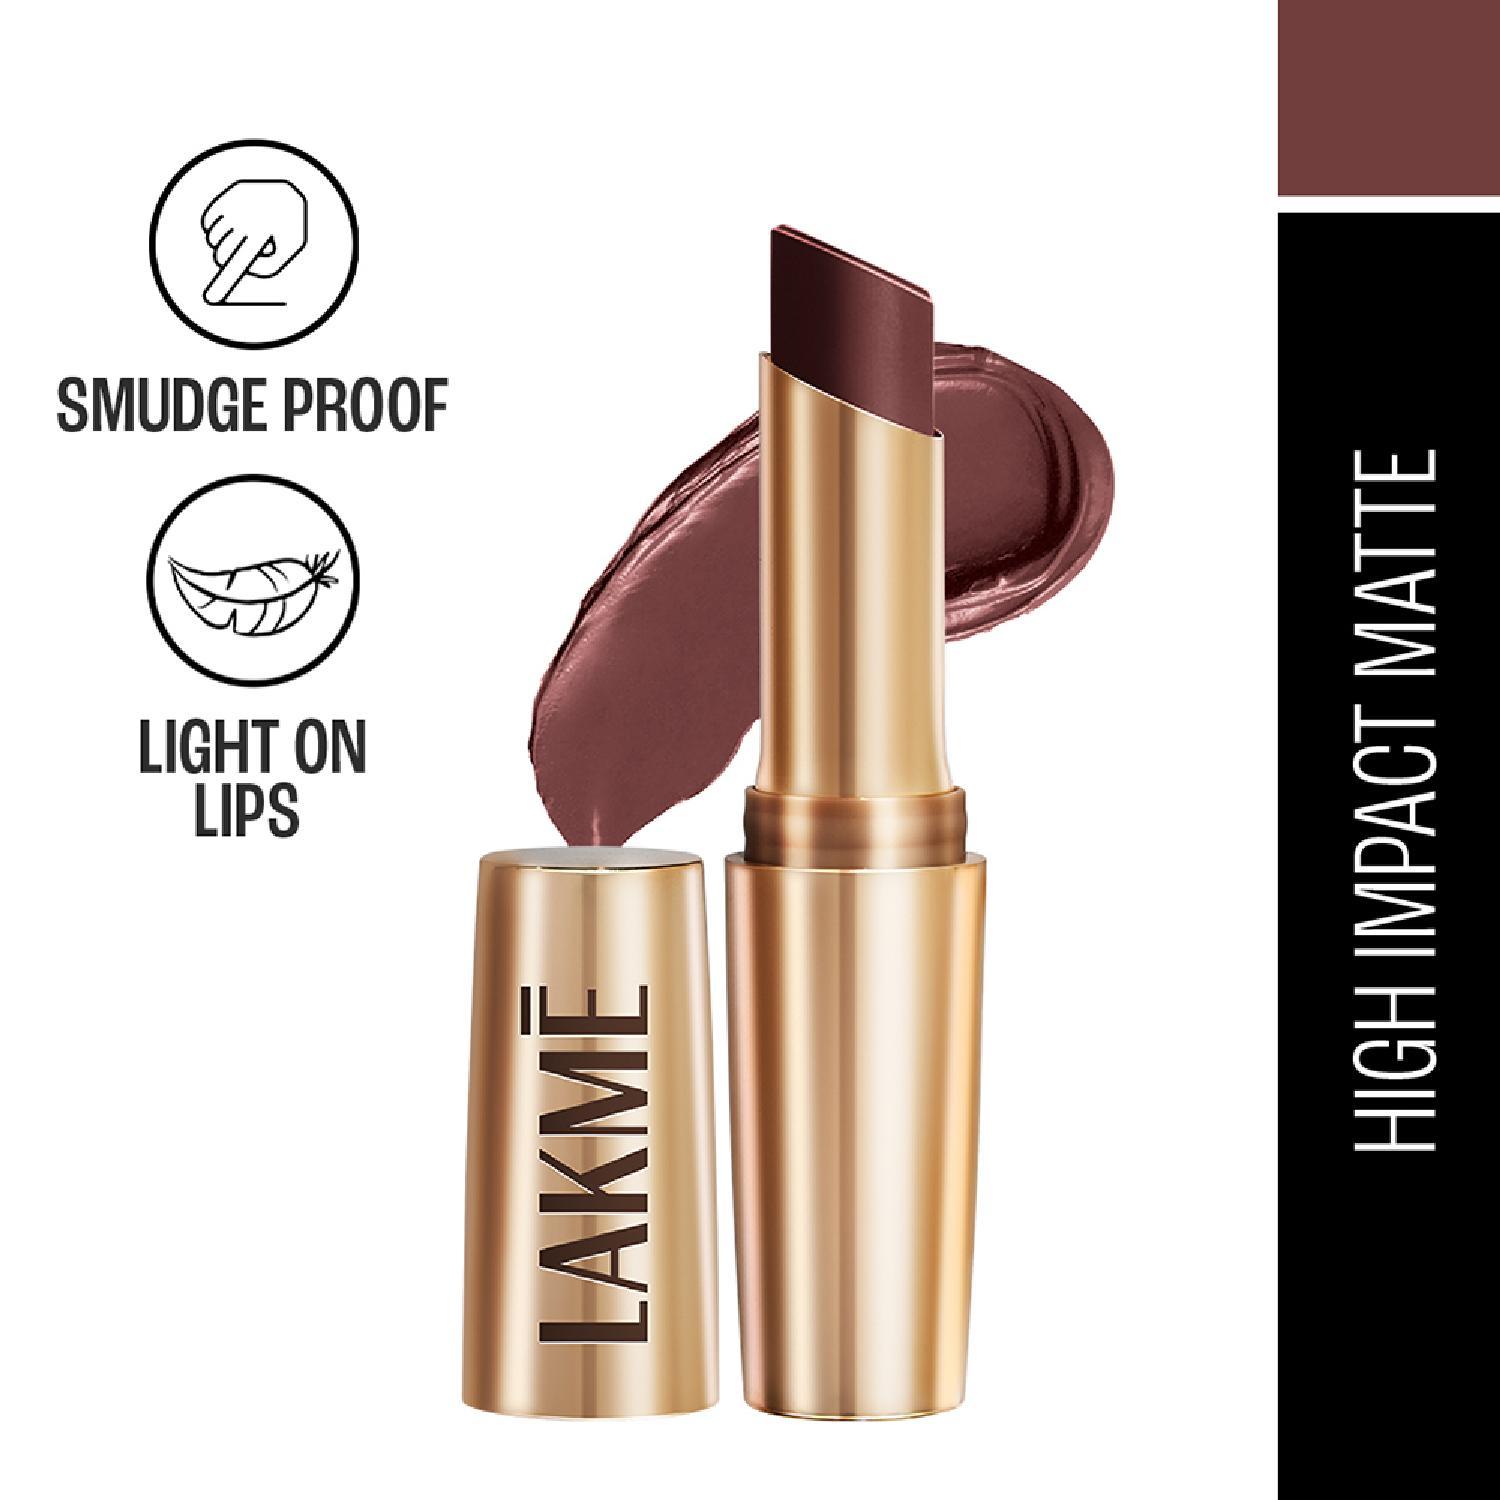 Lakme | Lakme 9 to 5 Powerplay Priming Matte Lipstick, Lasts 16hrs, Sangria Weekend (3.6g)